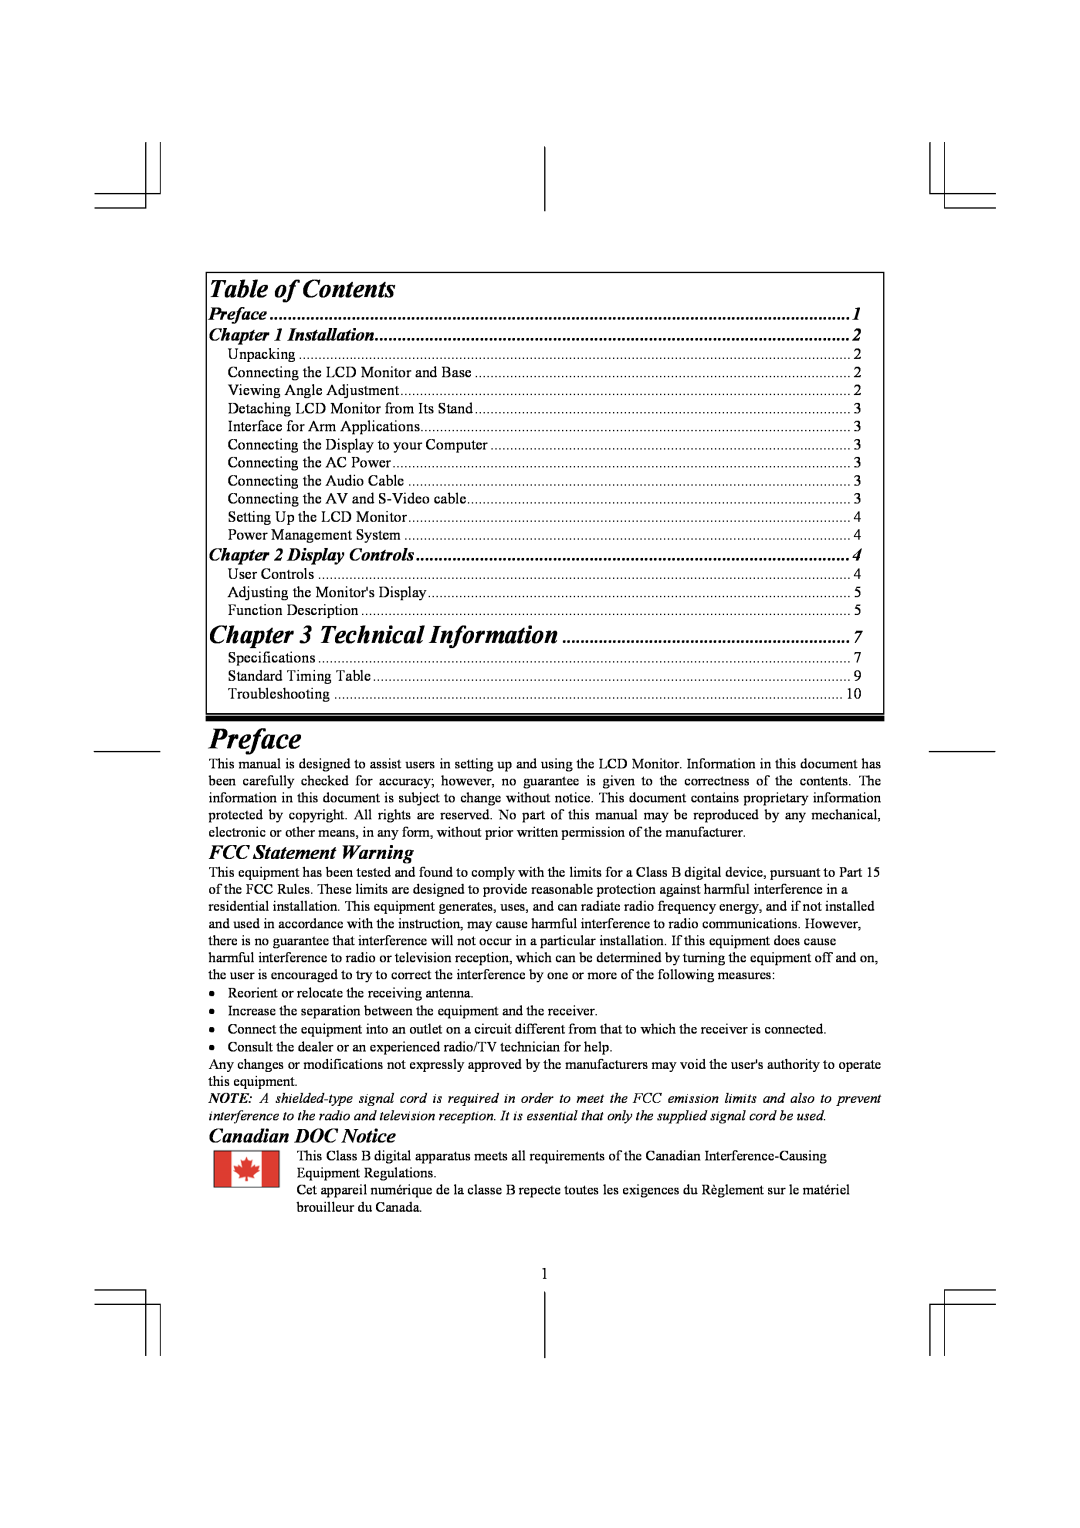 Acer AL1931 specifications Preface, Table of Contents, FCC Statement Warning, Canadian DOC Notice, Installation 